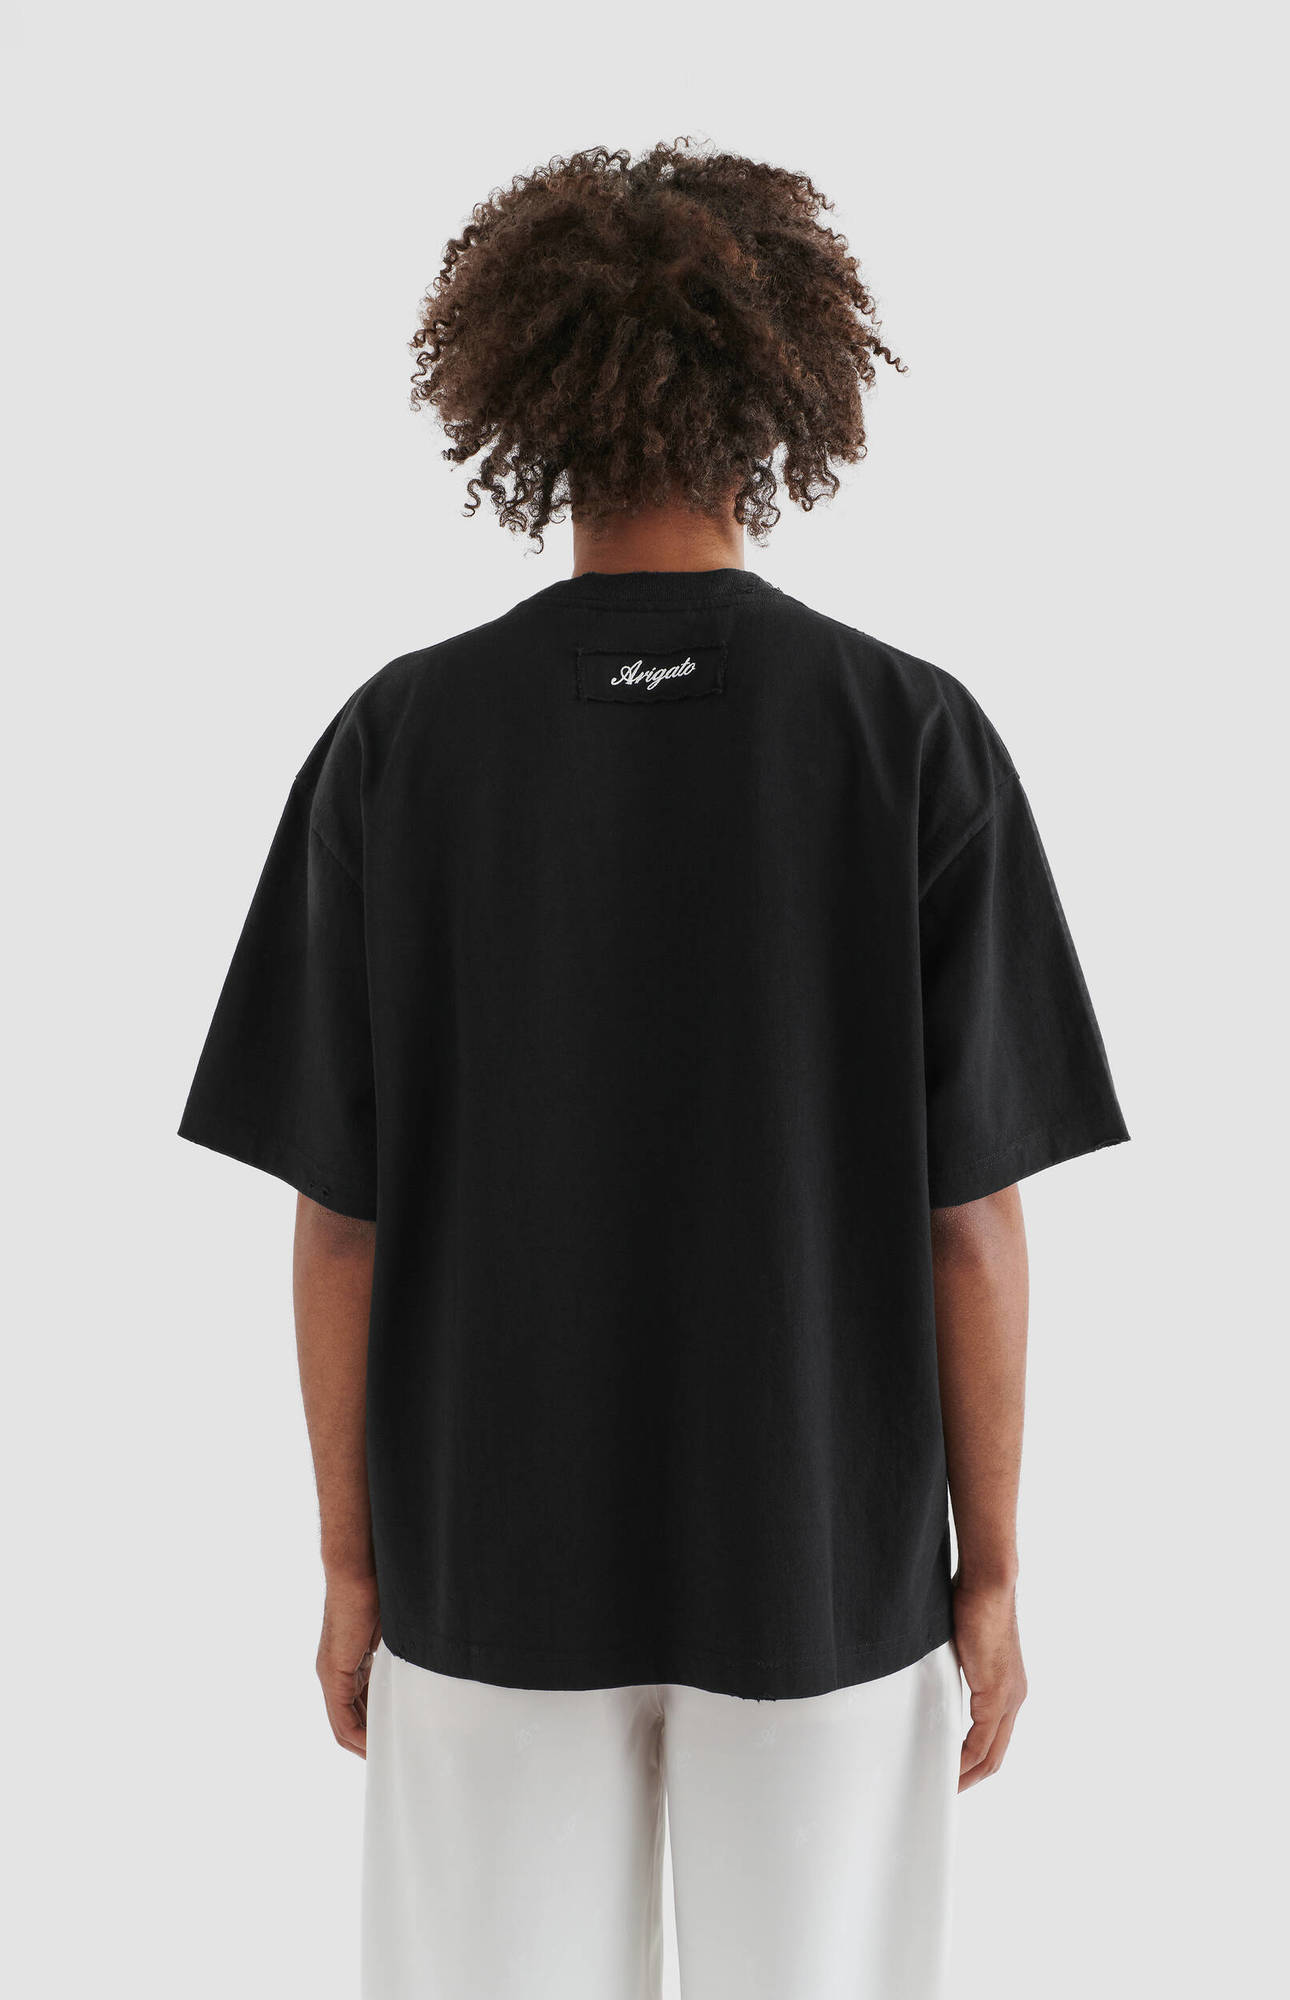 AXEL ARIGATO Series Distressed T-Shirt Backprinted in Black S